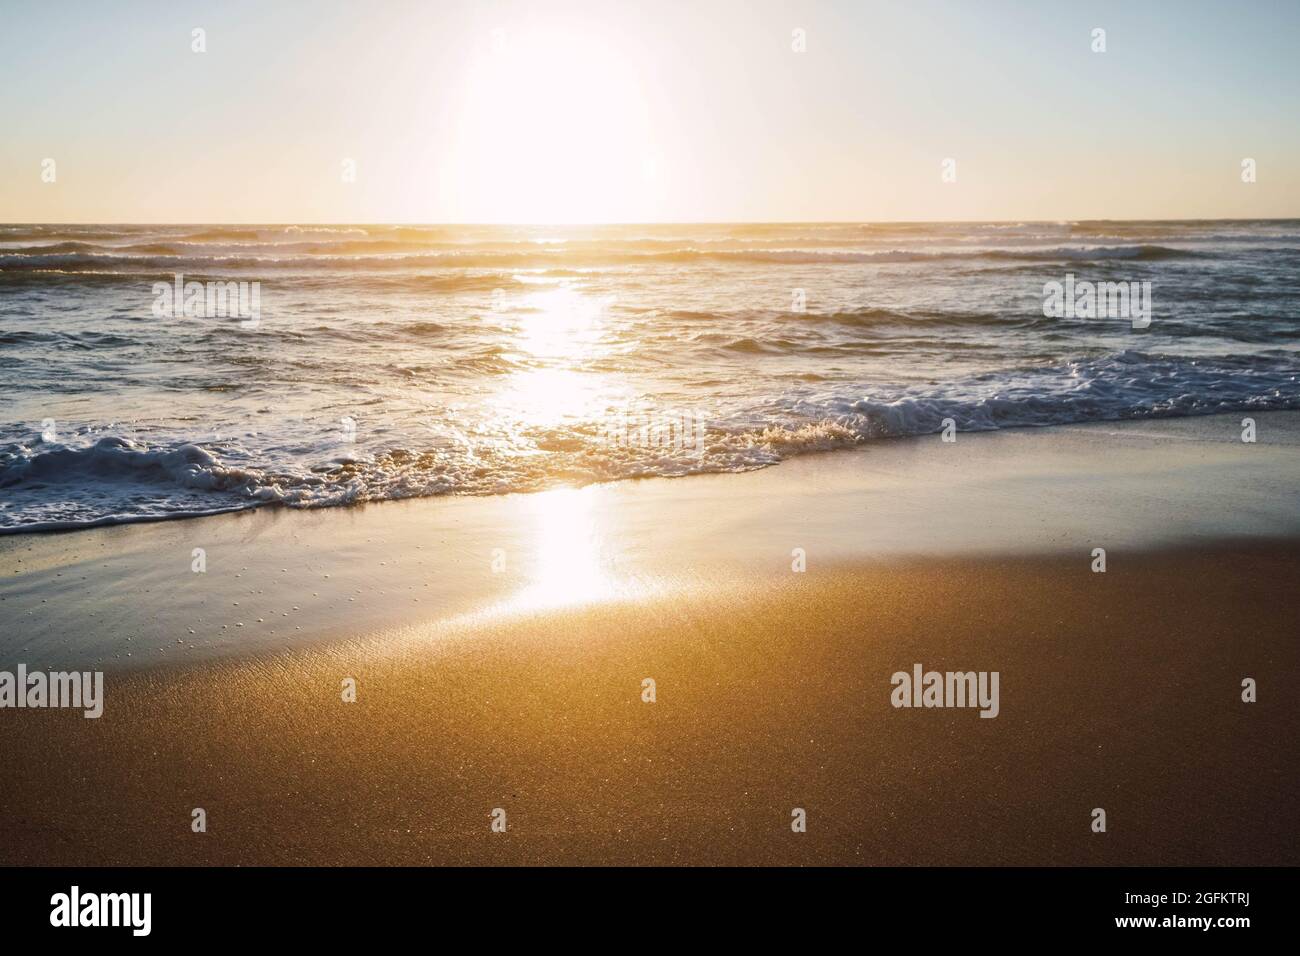 waves breaking on the shore of the beach with foam at sunset Stock Photo